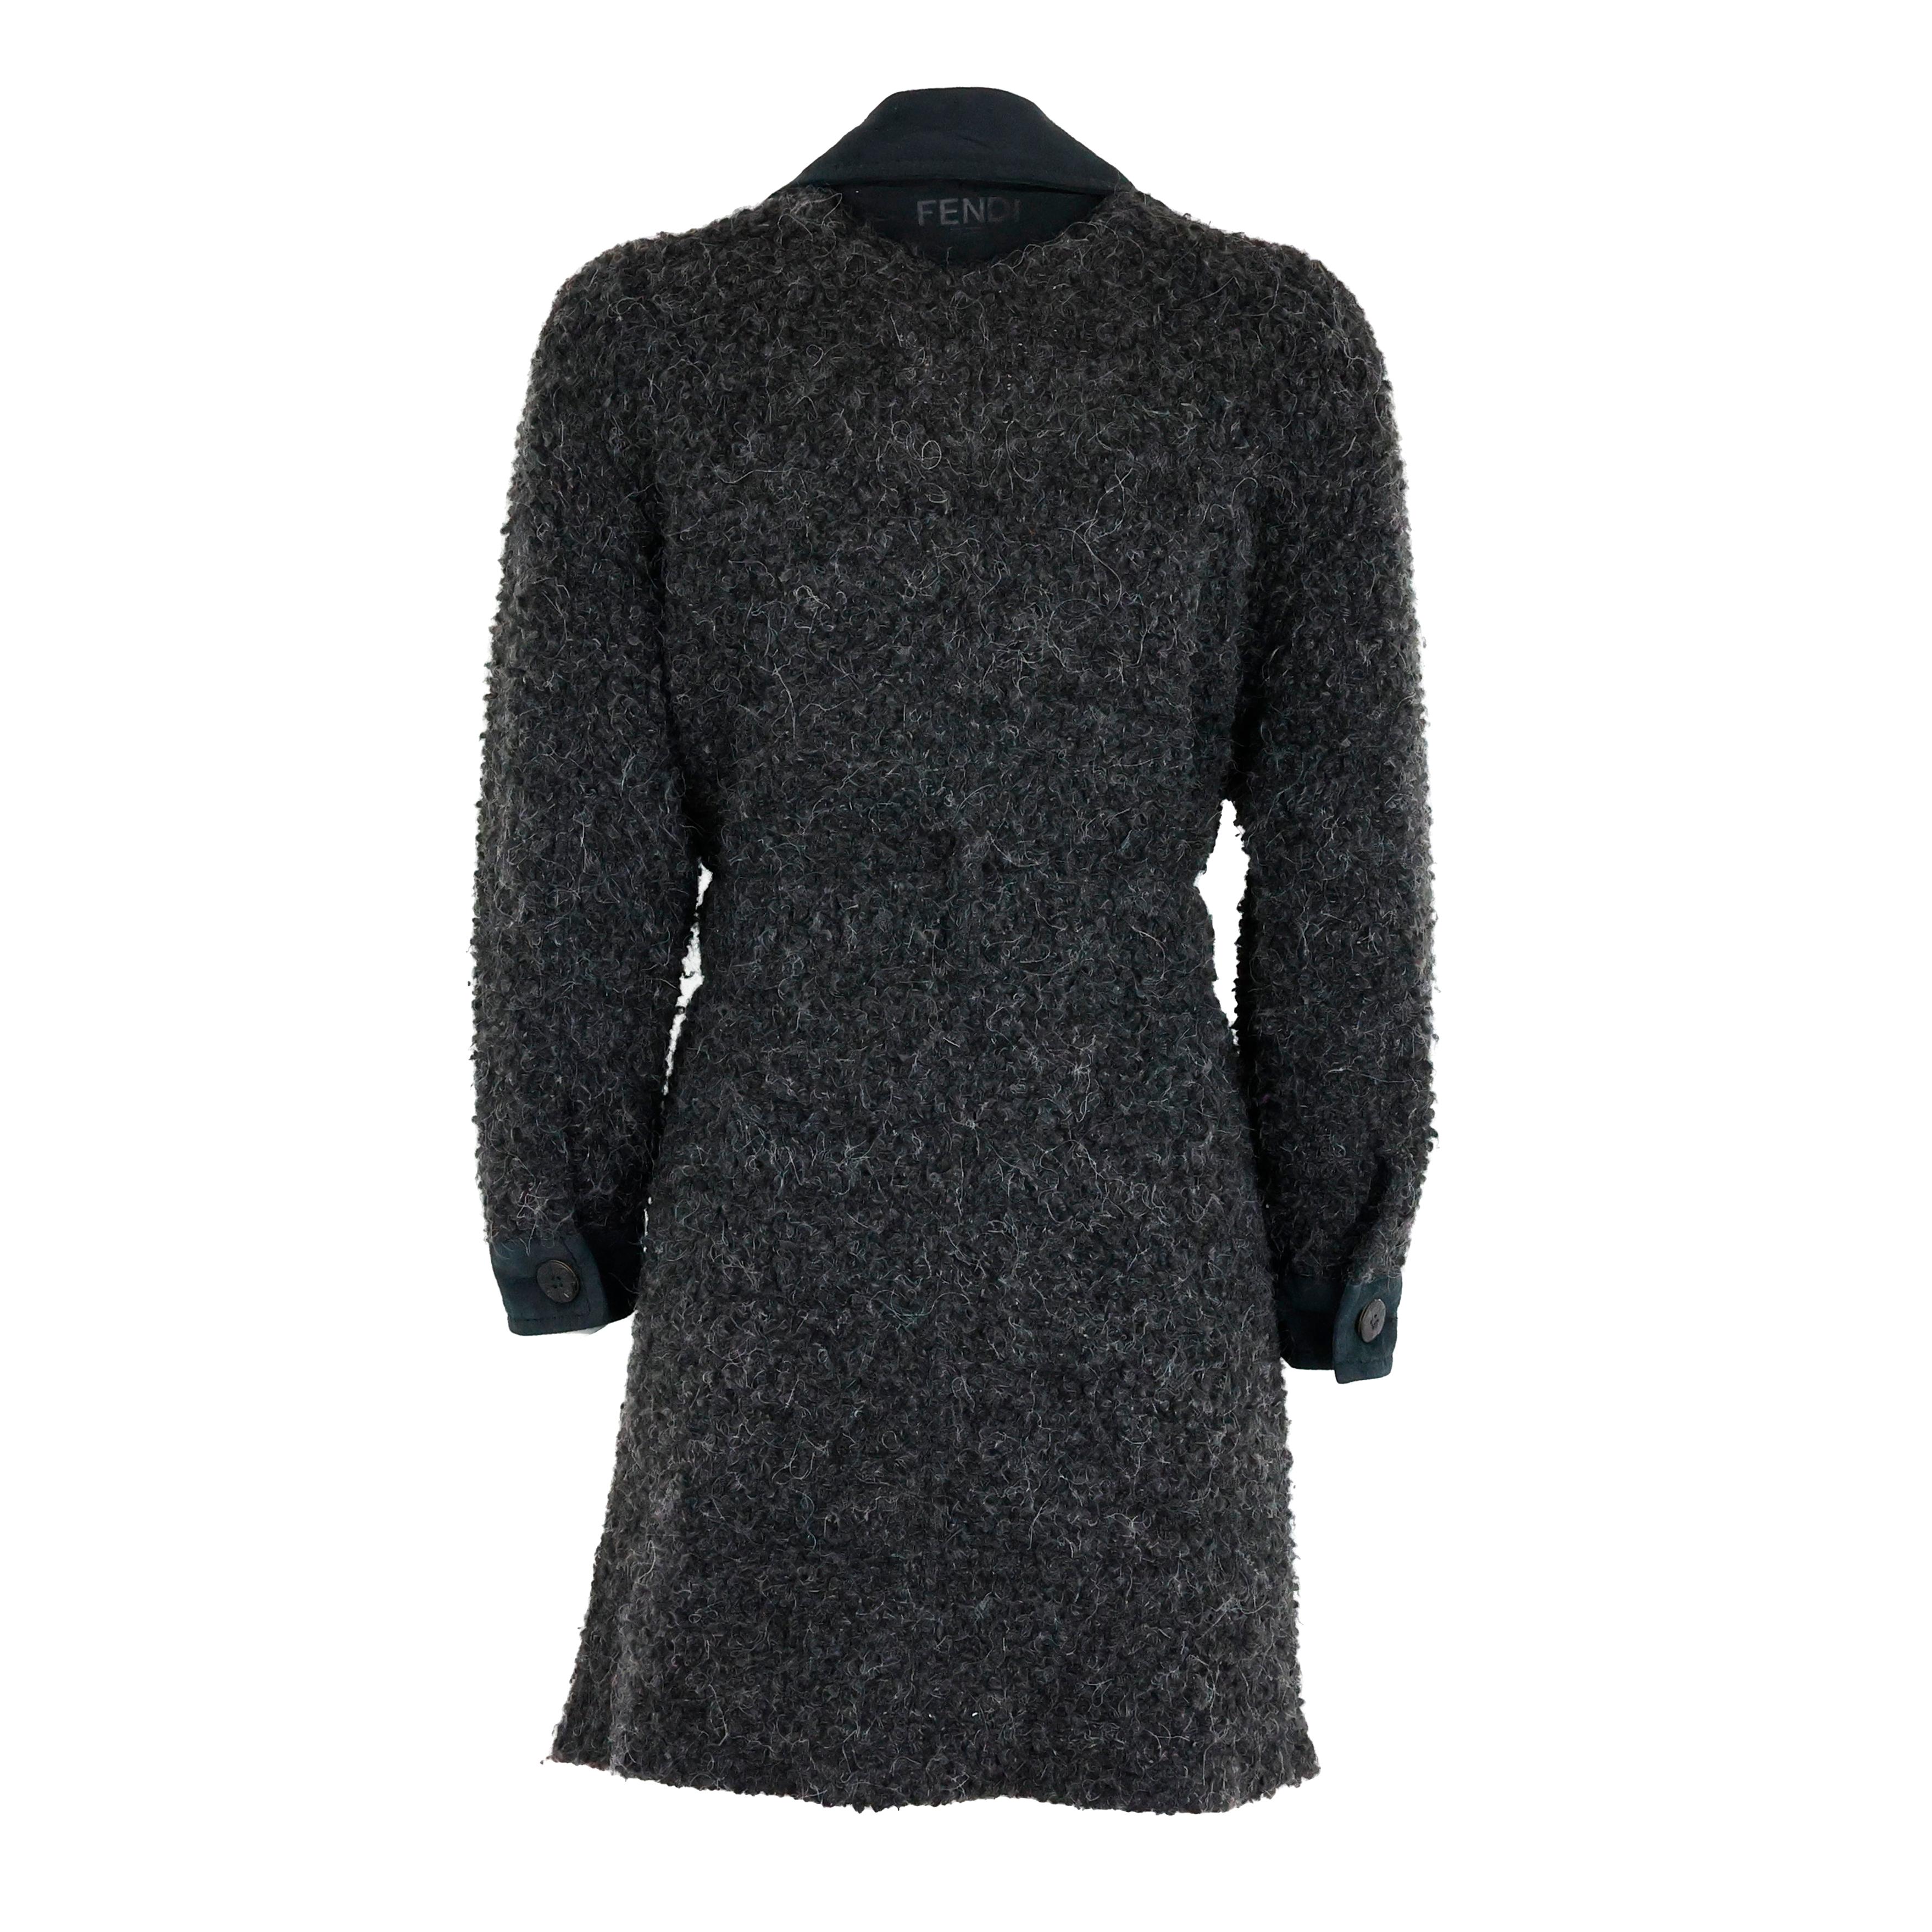 Fendi coat, color anthracite, size 38 IT.

Condition:
Really good.